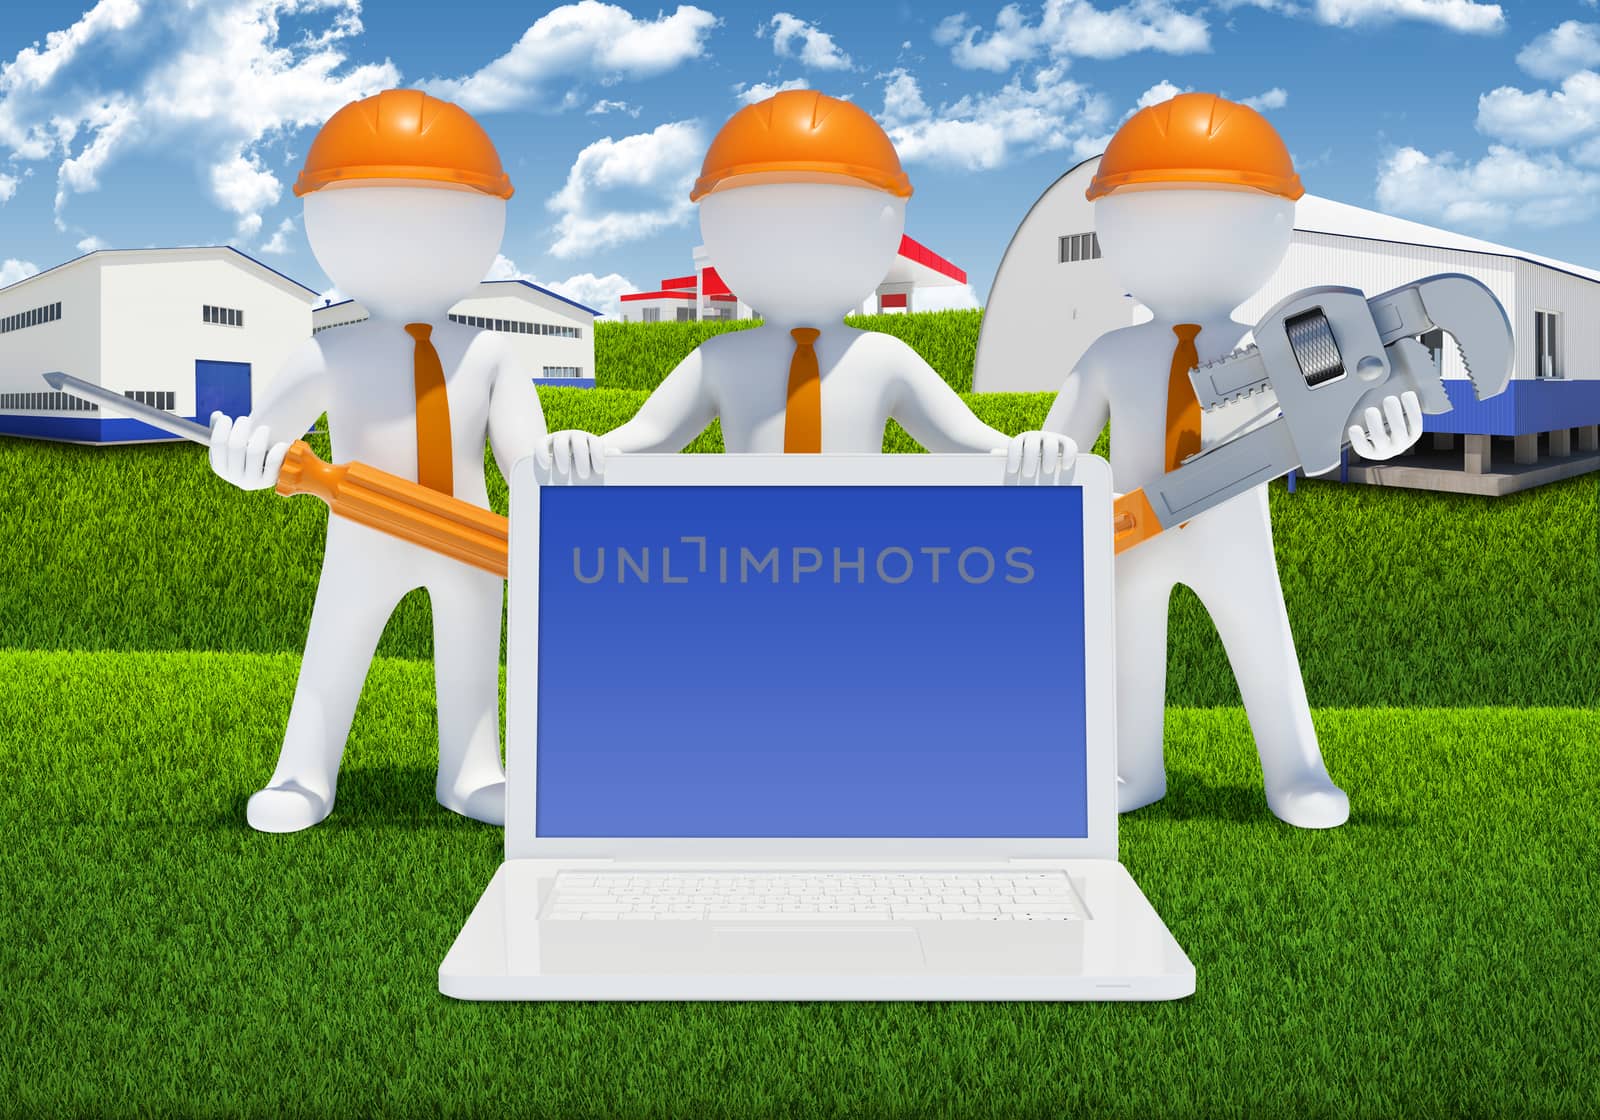 Three 3d white people with tools and laptop by cherezoff